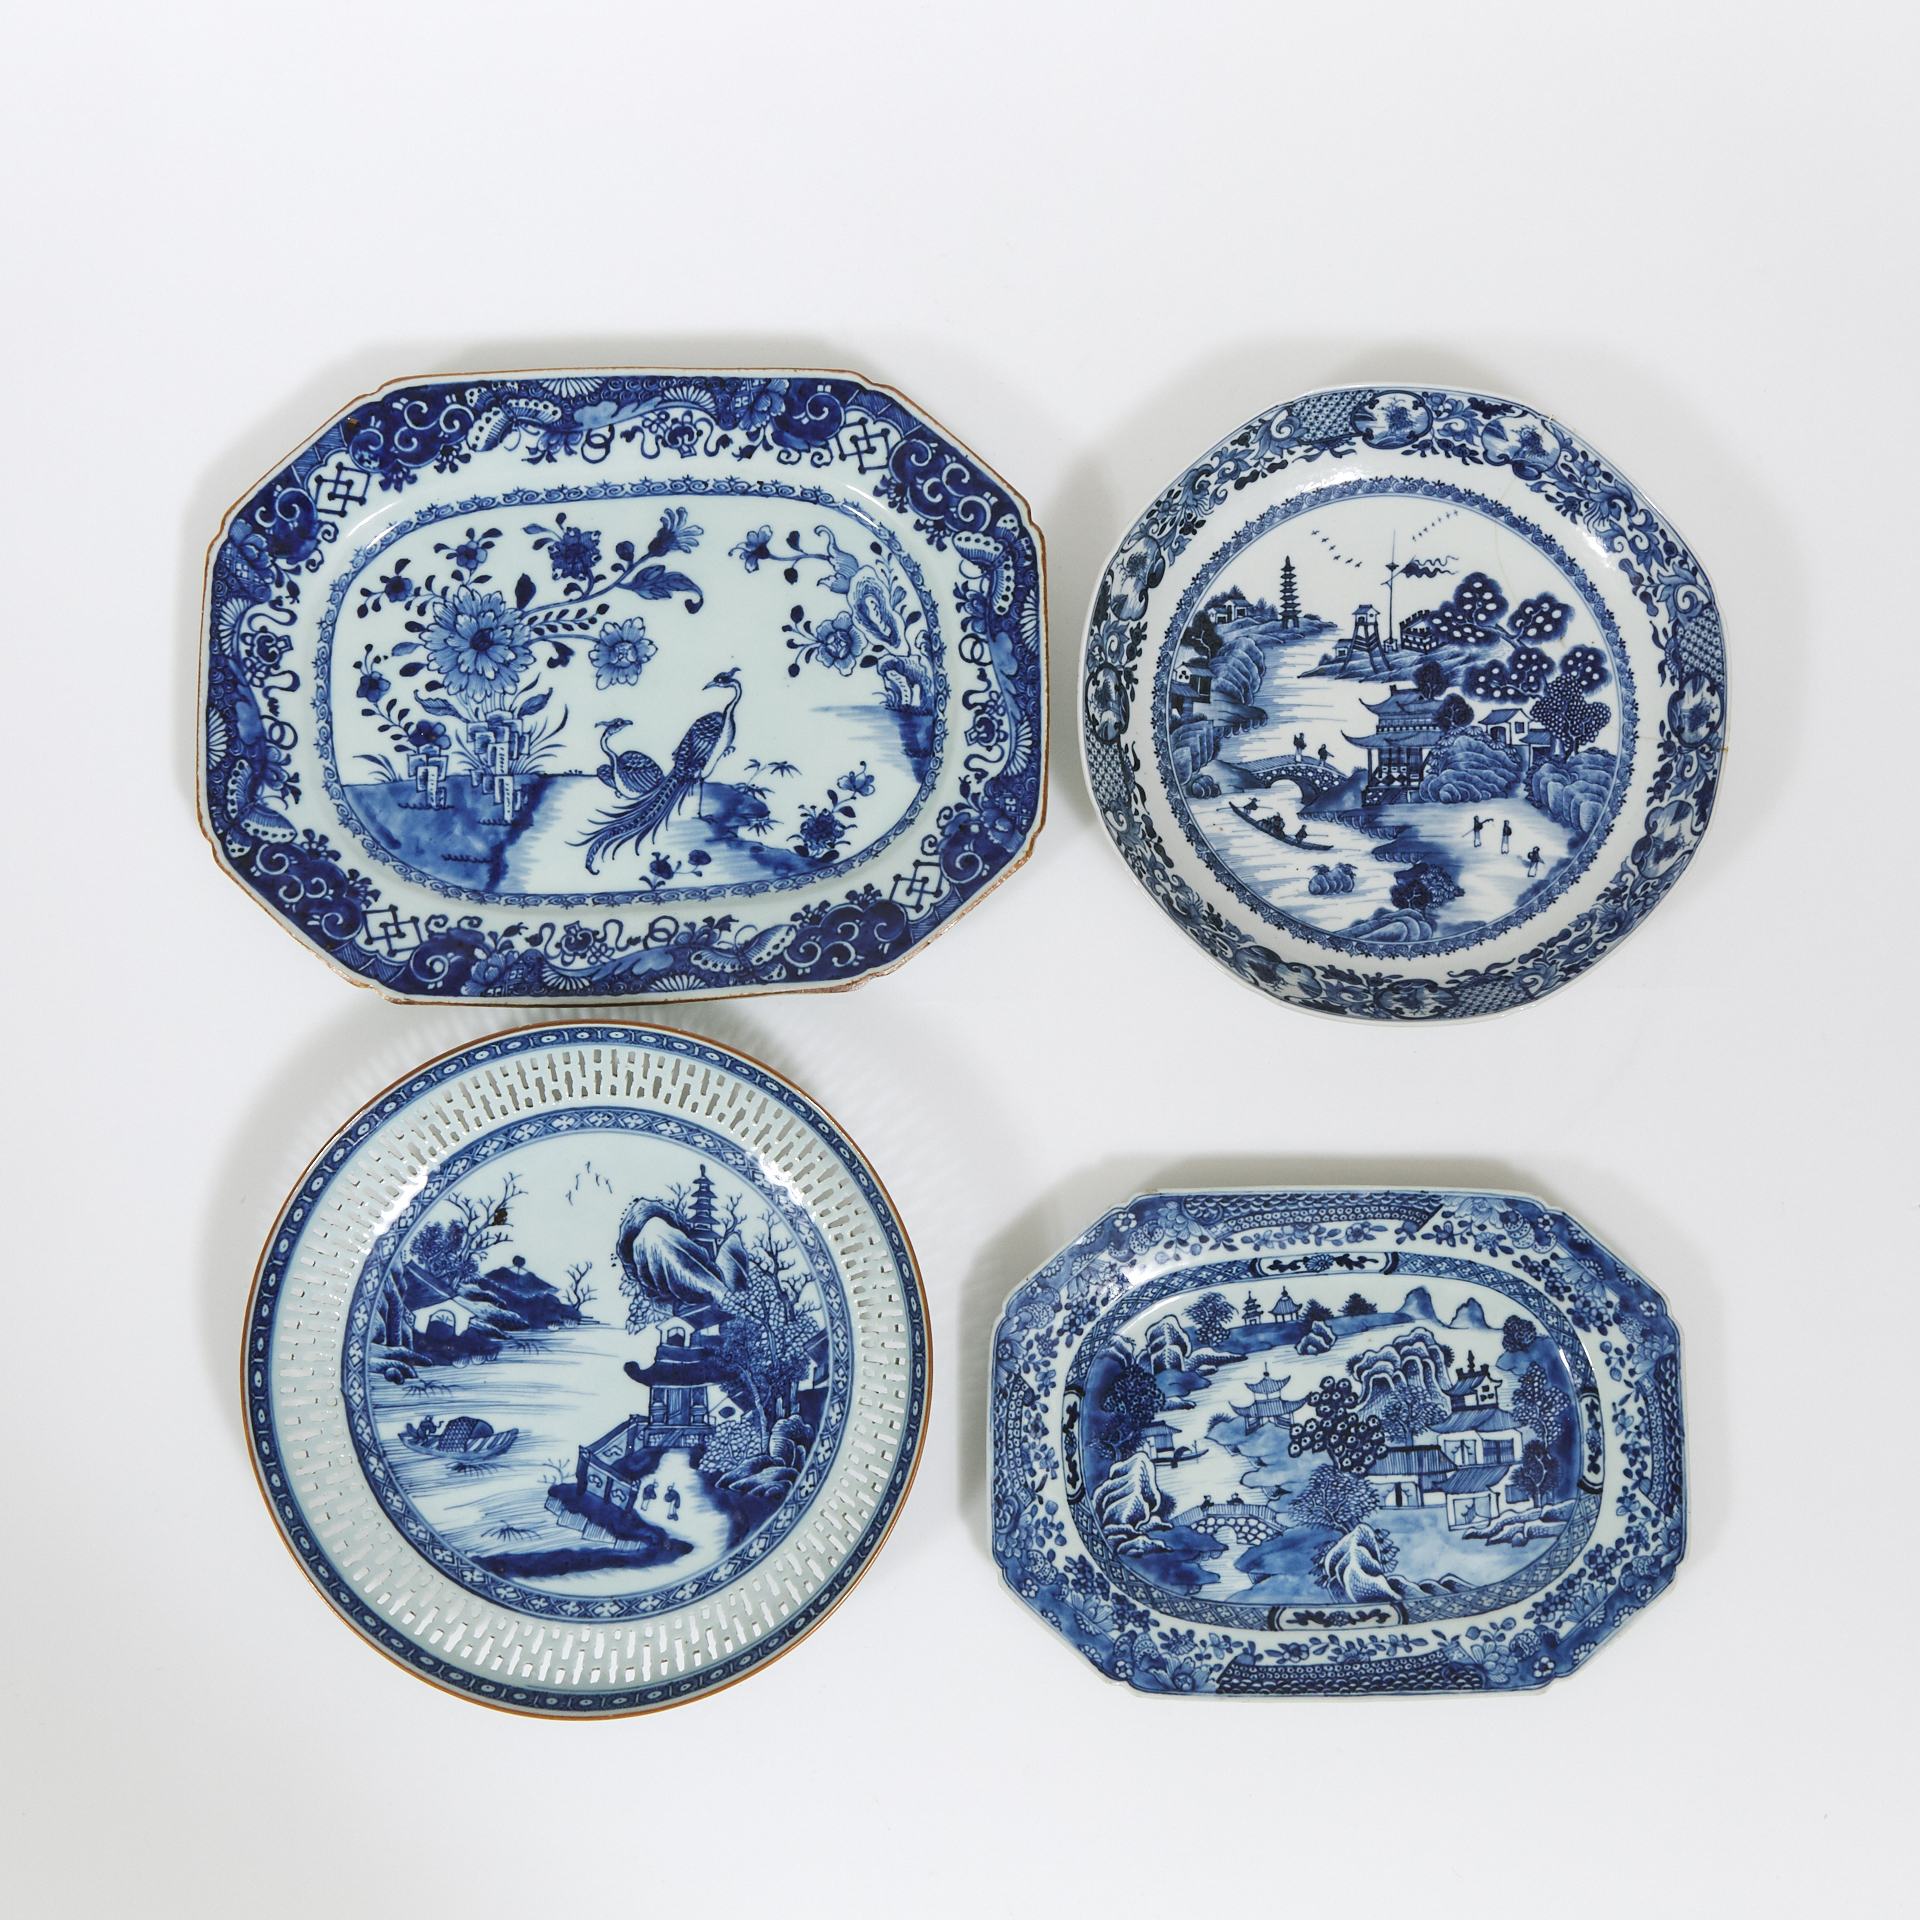 A Group of Four Chinese Export Blue and White Plates, Qianlong Period, 18th Century